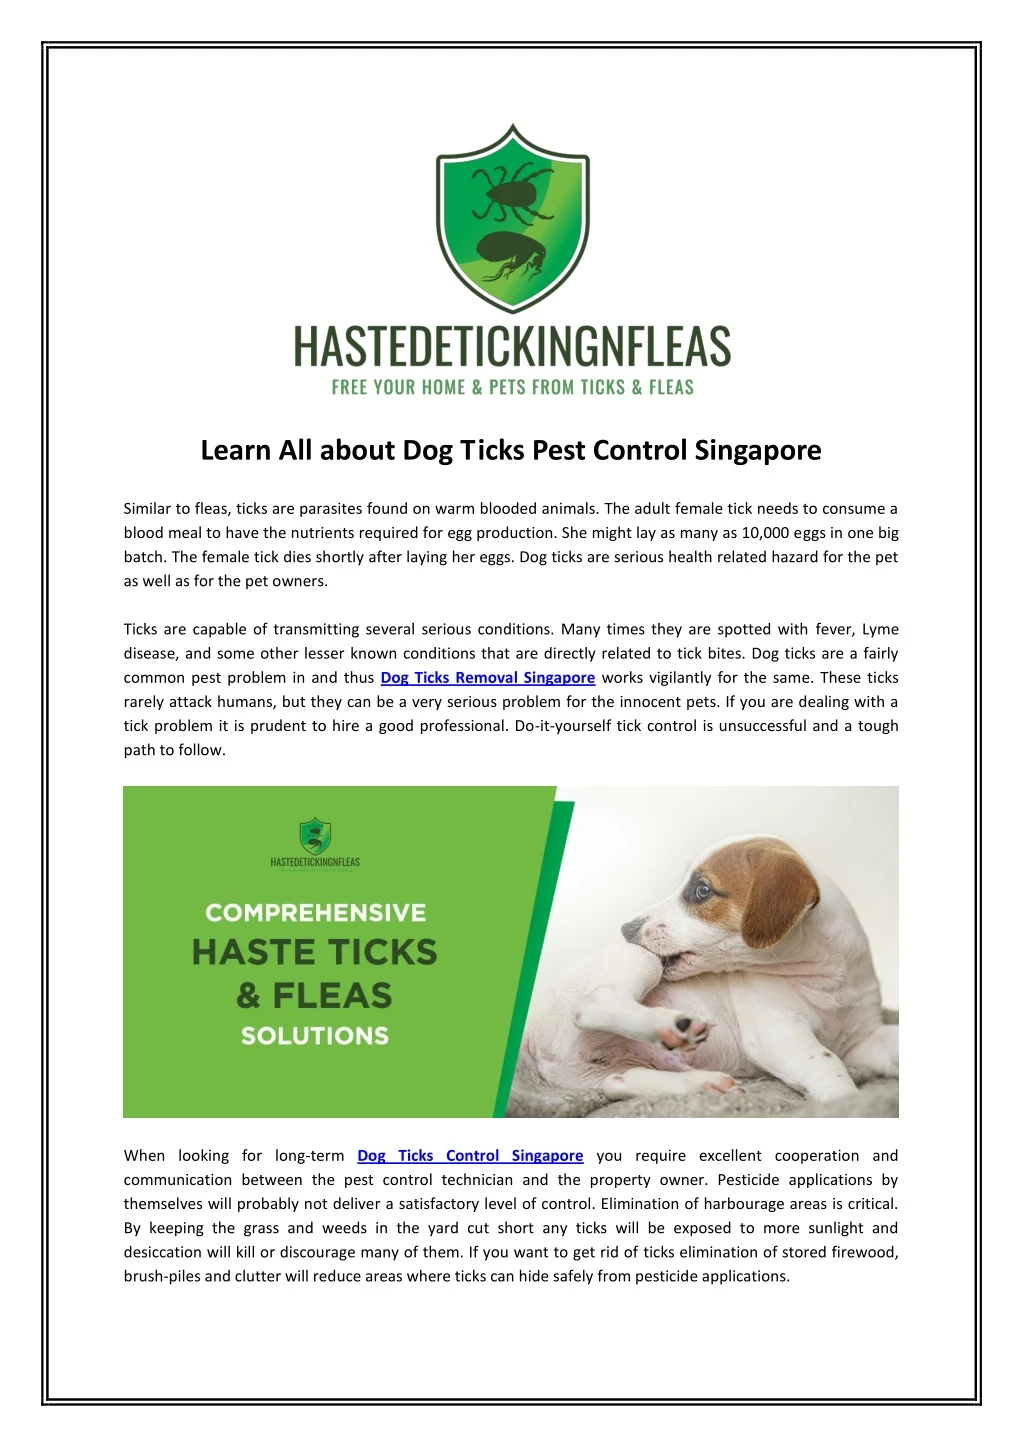 learn all about dog ticks pest control singapore